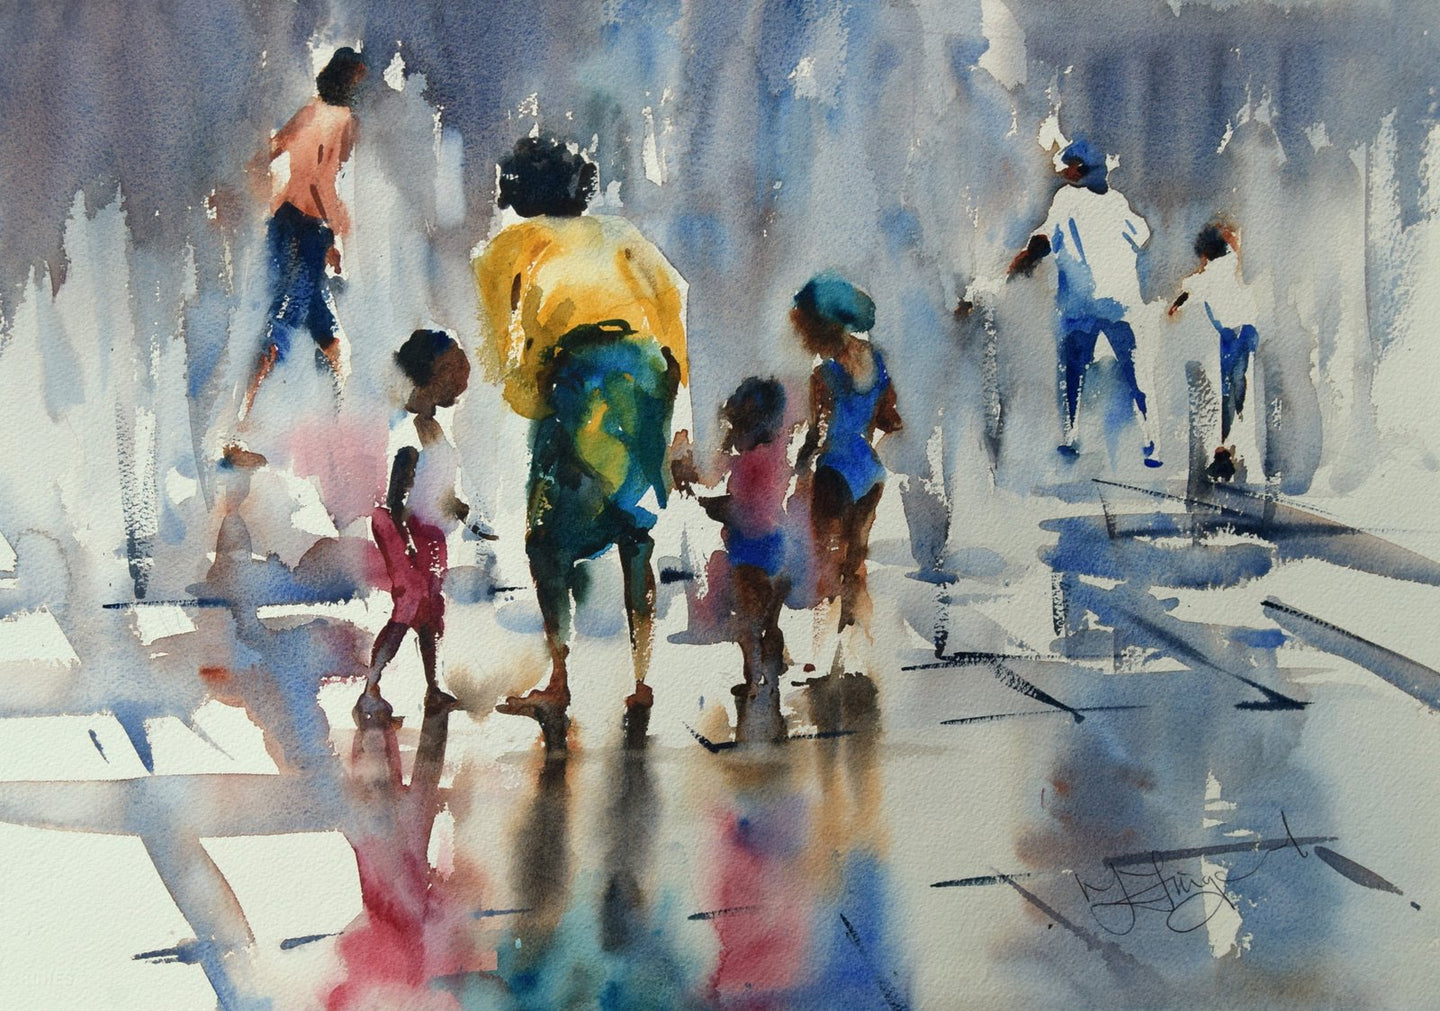 Classic watercolour by Trevor Lingard, with colourful figures and children playing in a fountain.